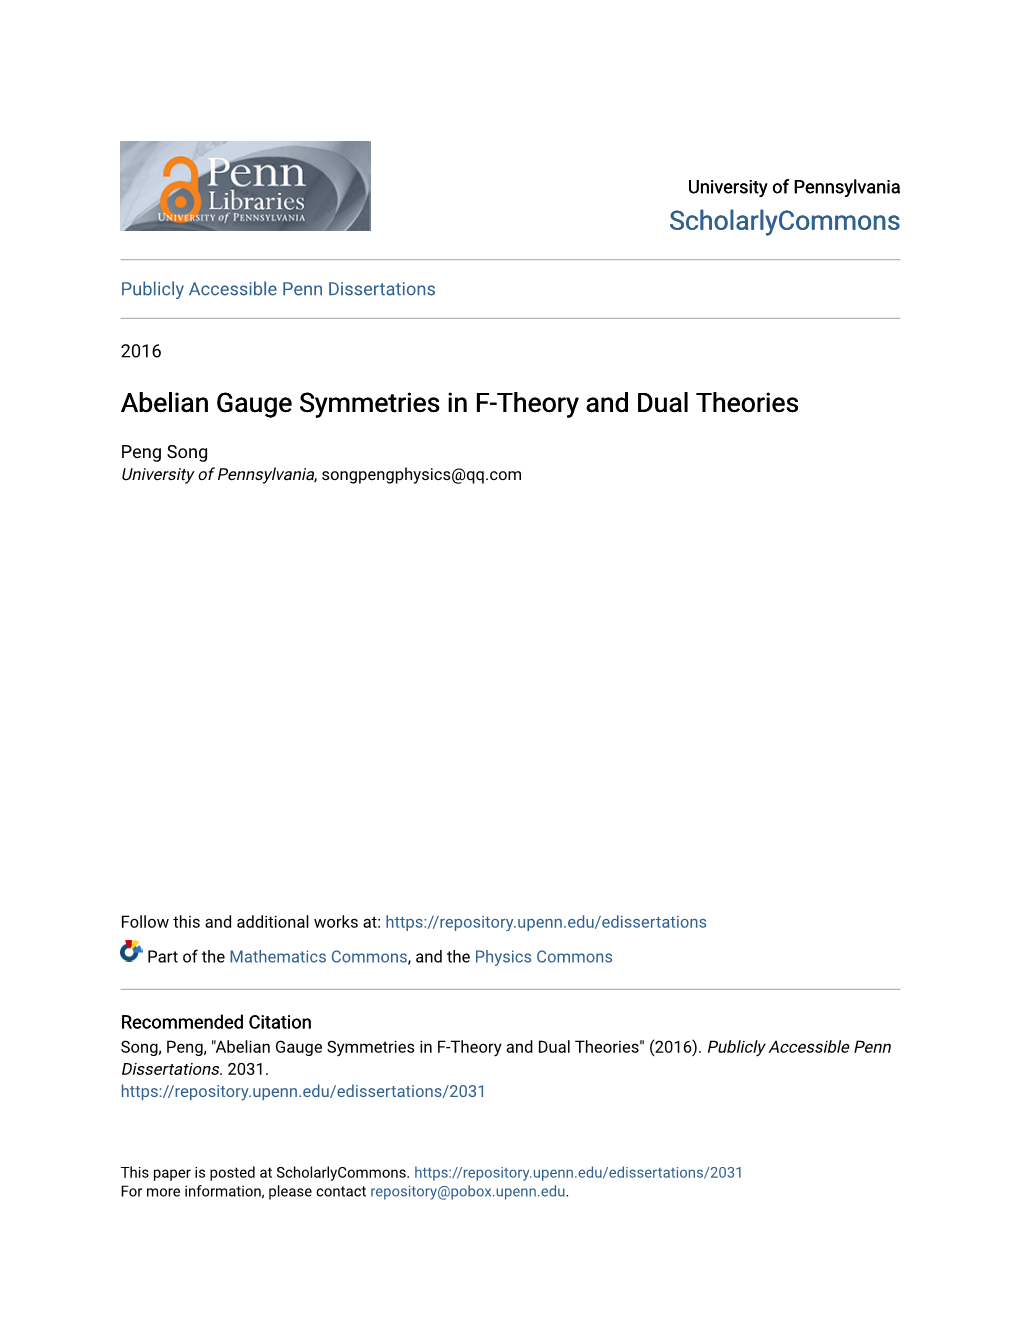 Abelian Gauge Symmetries in F-Theory and Dual Theories